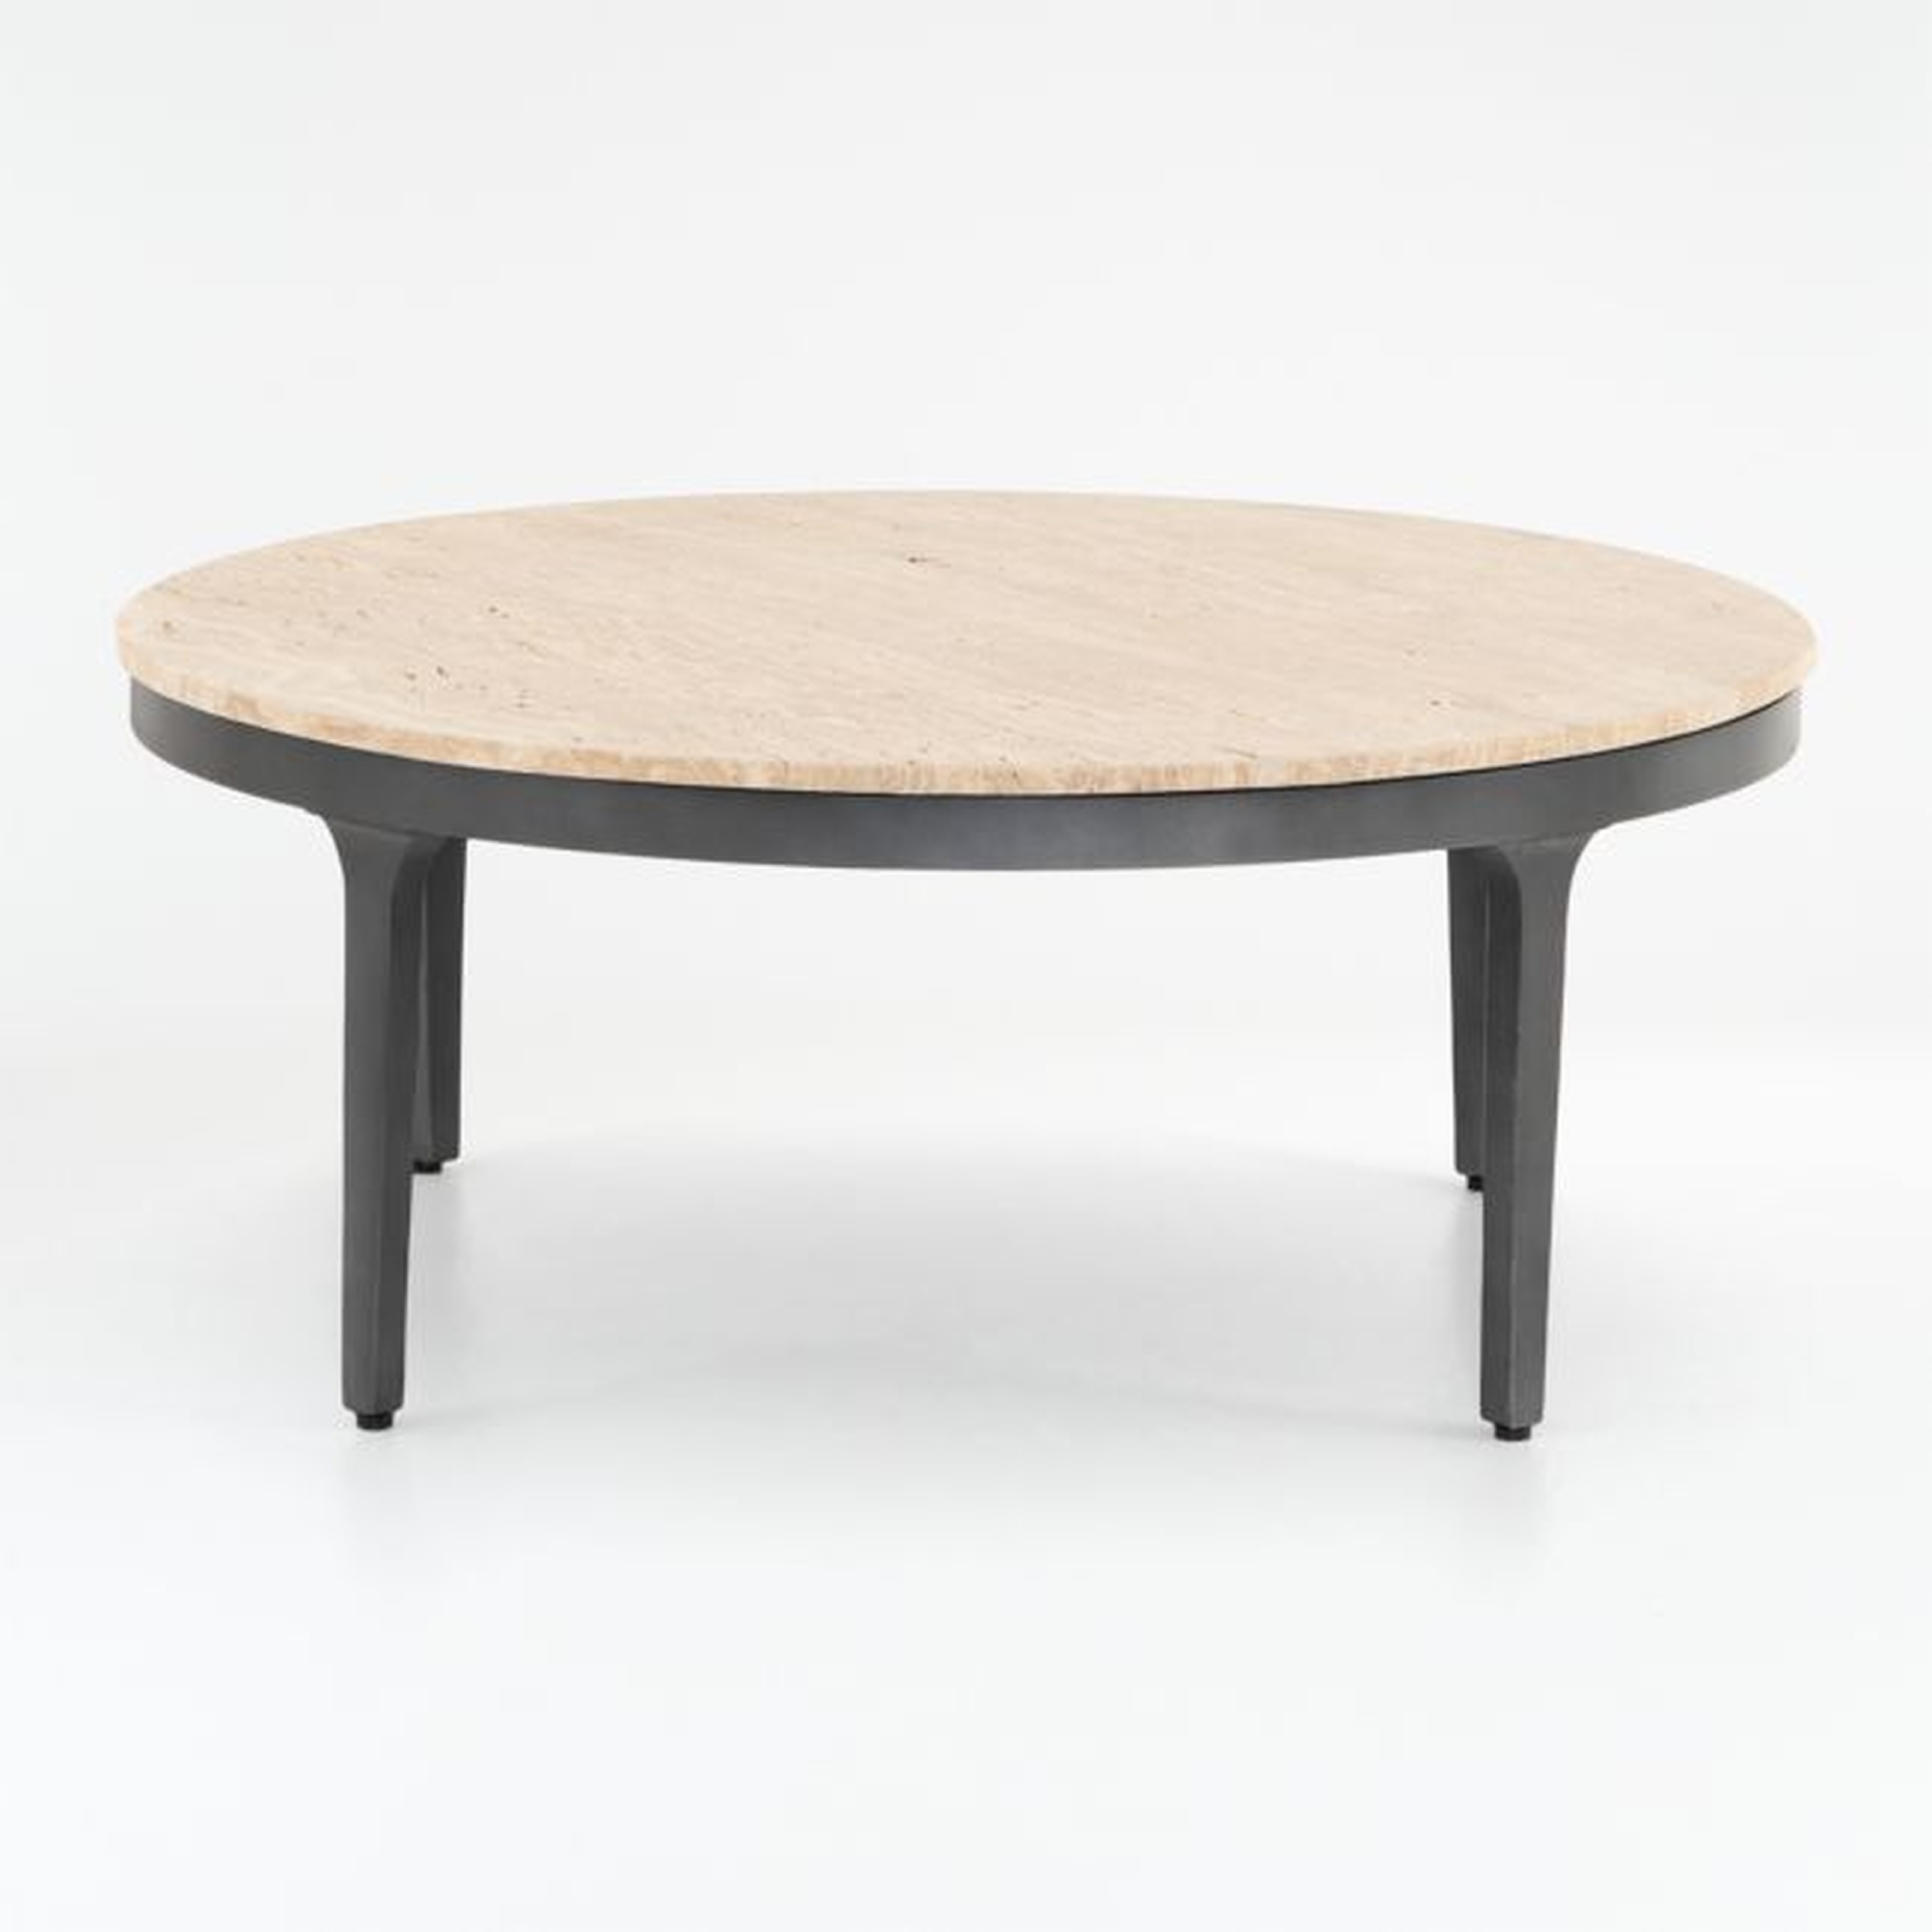 Rae Coffee Table - Crate and Barrel